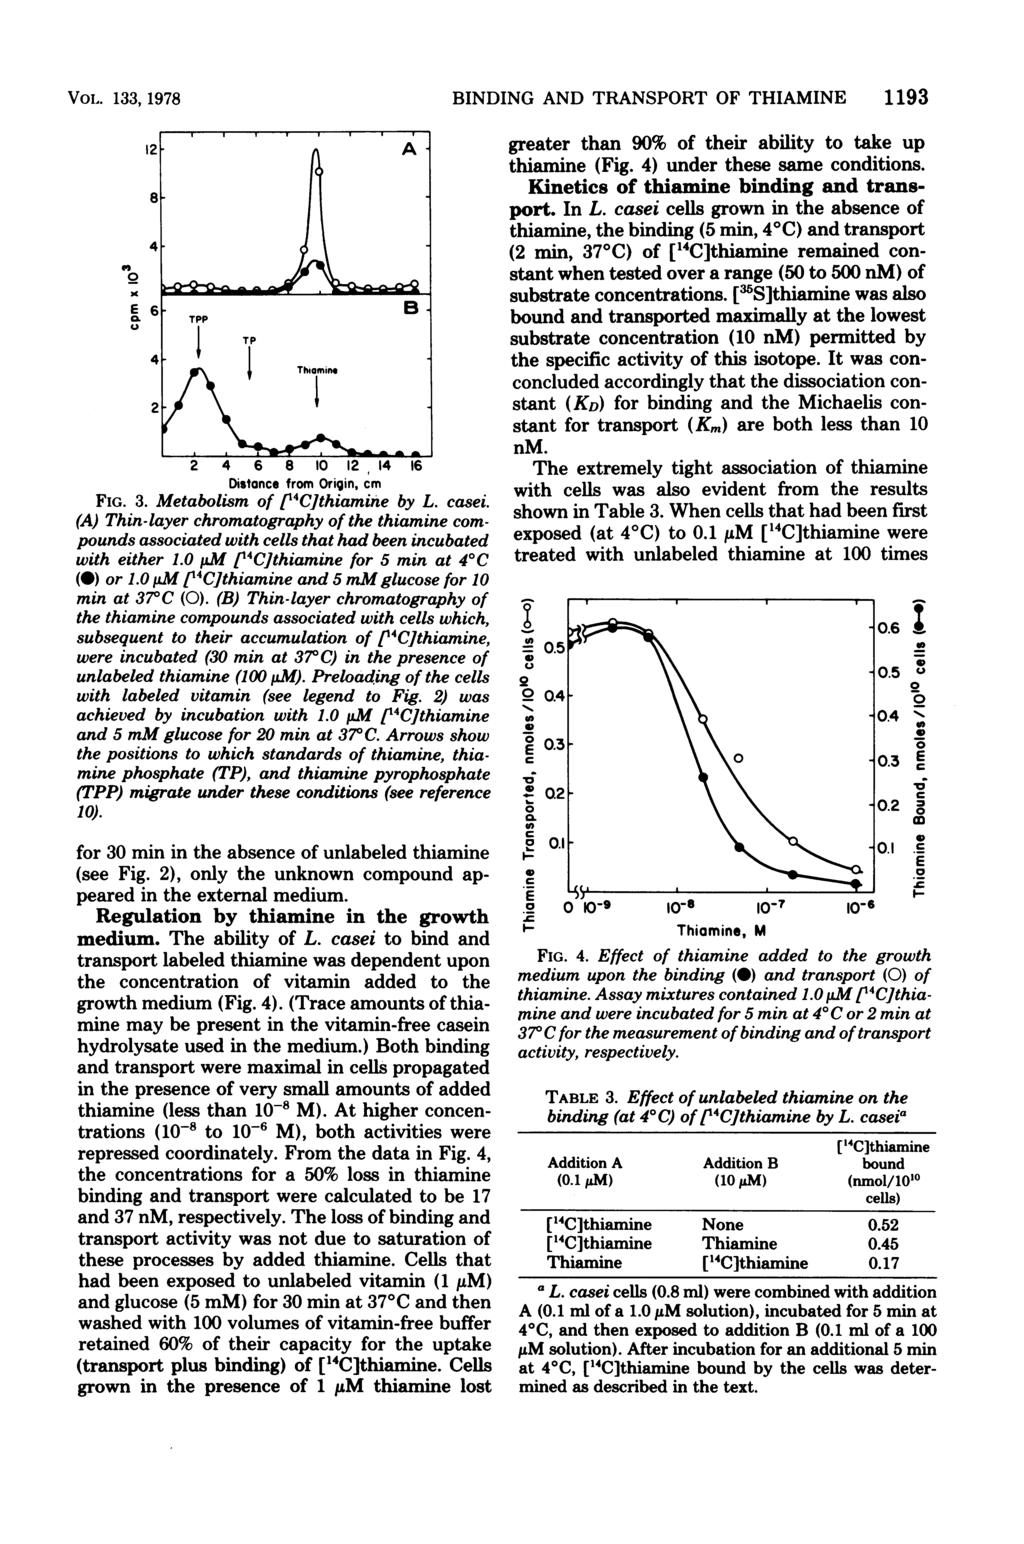 VOL. 133, 1978 BINDING AND TRANSPORT OF THIAMIN 1193 C 6 TPpB 4 TP << ~~~~Thbiamine 2 4 6 8 1 12, 14 16 Distane from Origin, m FIG. 3. Metabolism of ["Cithiamine by L. asei.